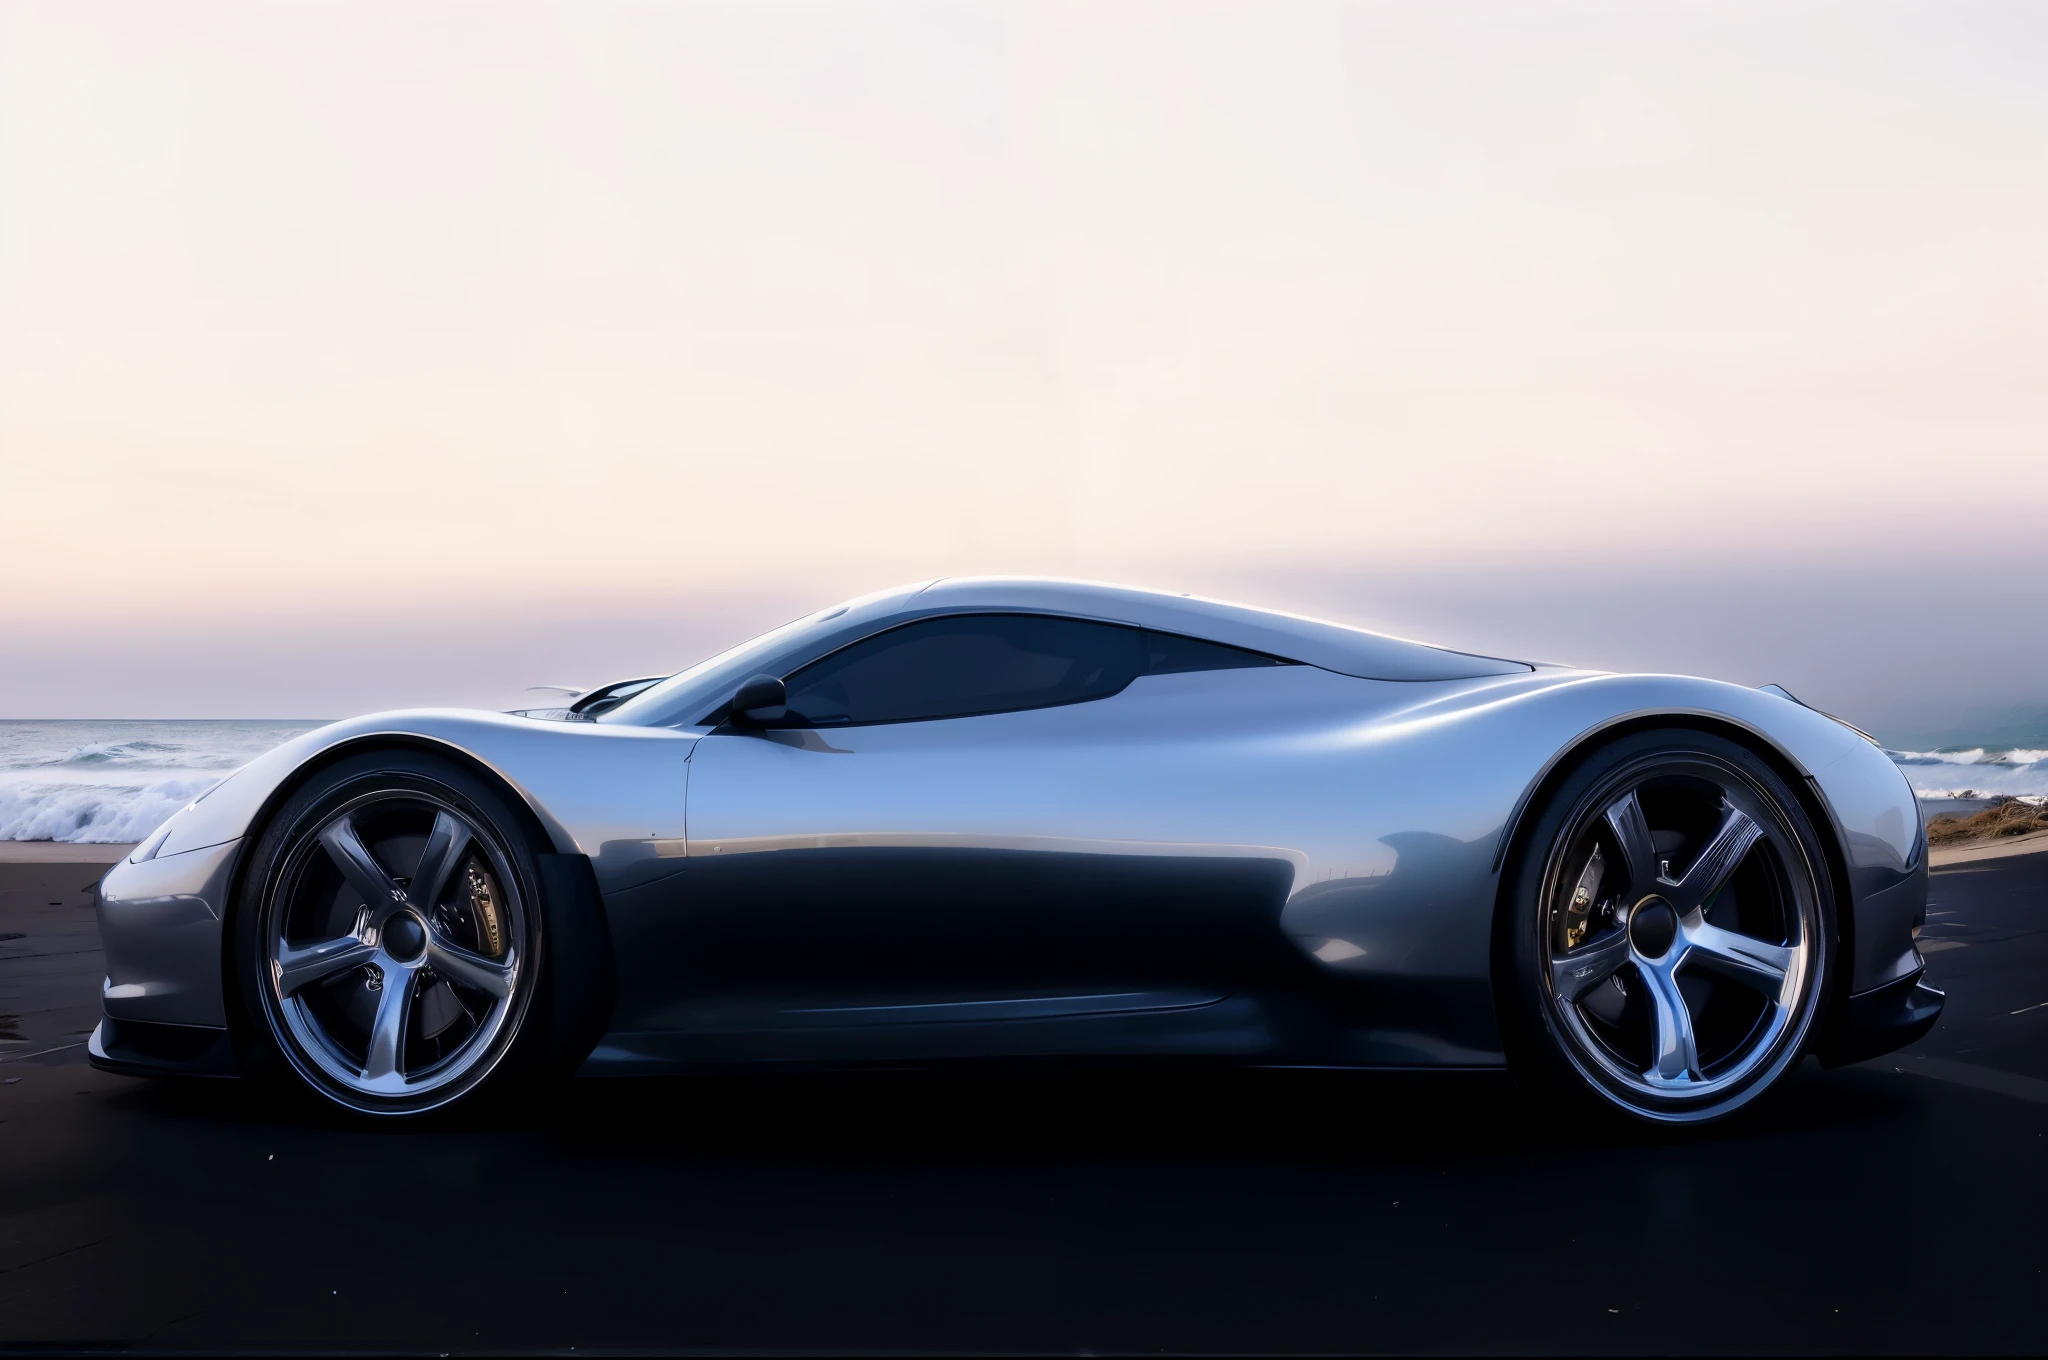 a close up of a silver sports car on a road near the ocean, side perspective, futuristic product car shot, profile perspective, render of futuristic supercar, concept car, sleek interceptor profile, profile view perspective, cgi render, cgi rendering, hyper real render, high resolution render, super rendered in octane render, digitally painted, hyperrealistic render